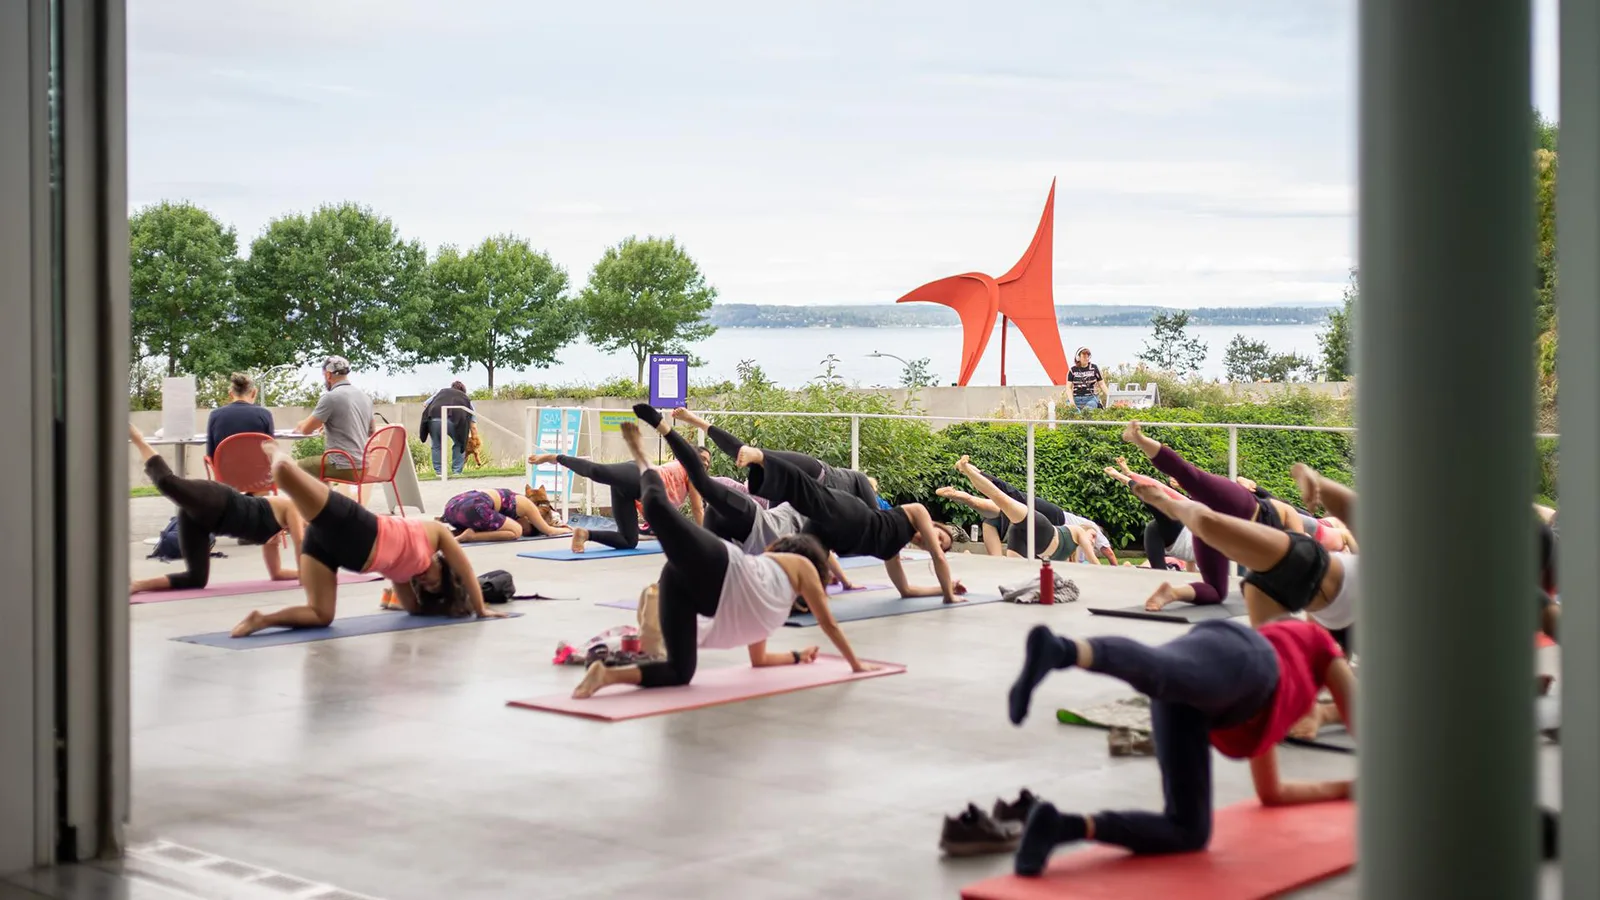 A group doing yoga at Olympic Sculpture Park Pavilion.